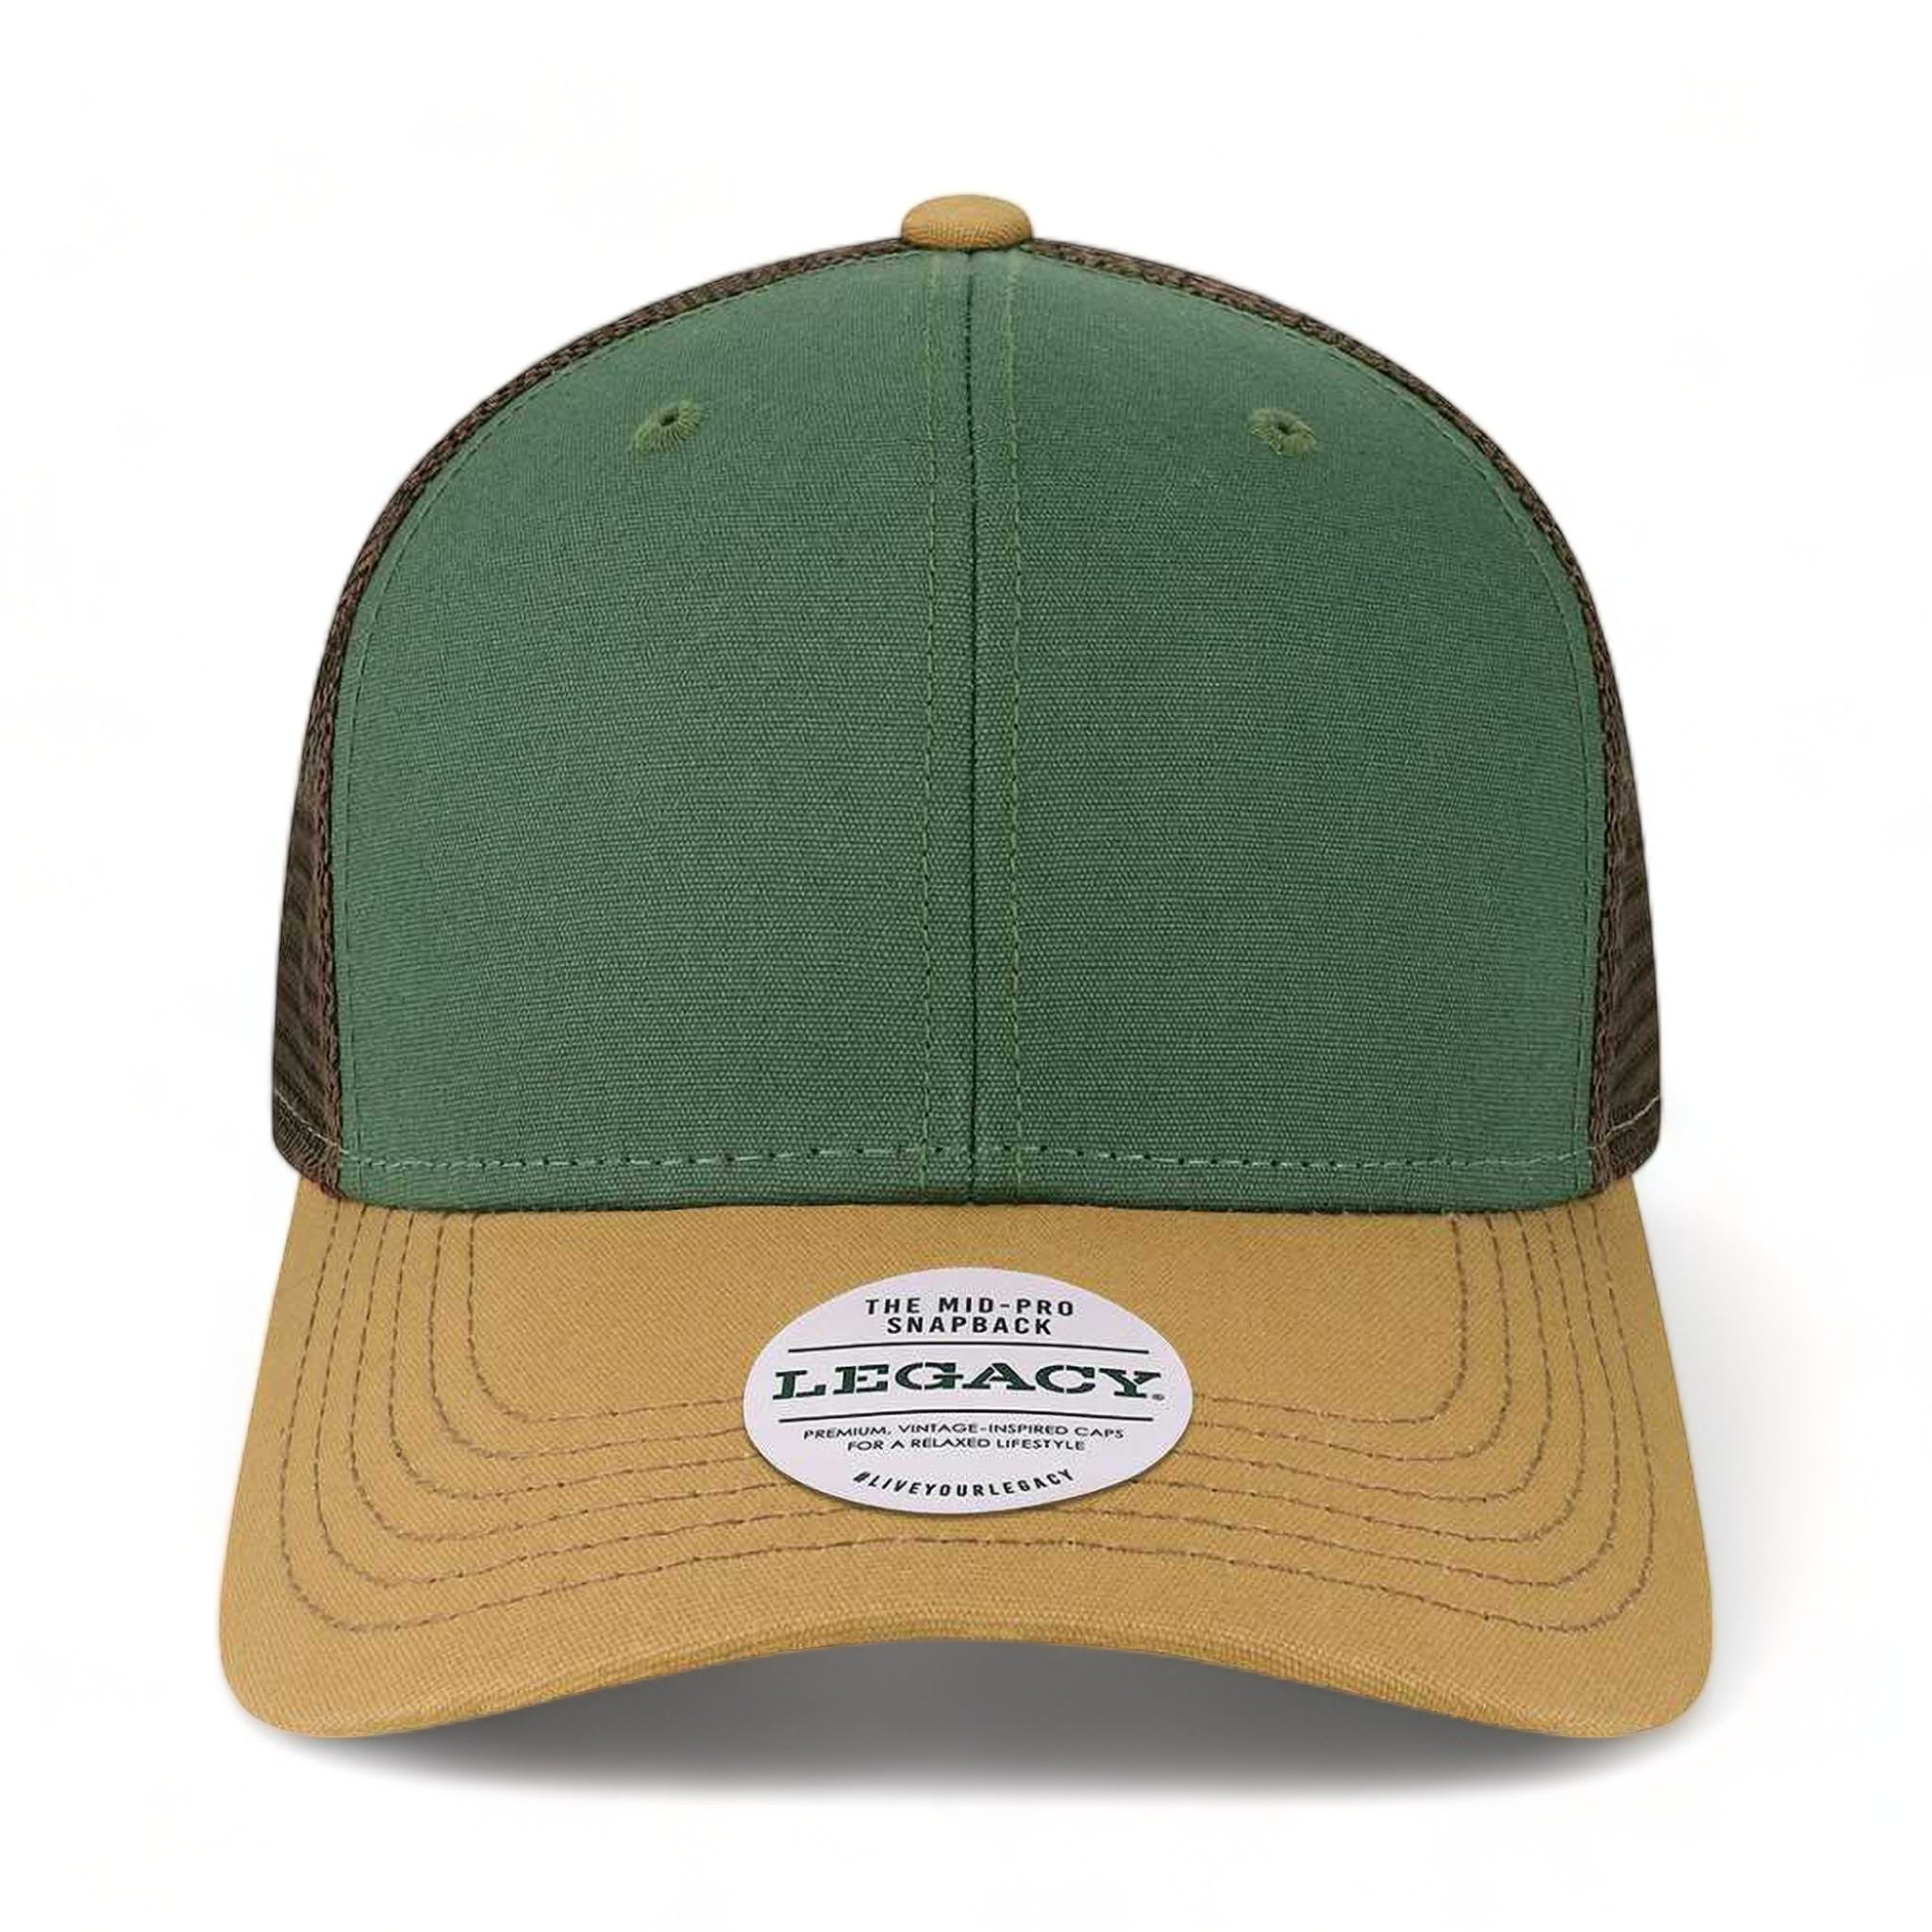 Front view of LEGACY MPS custom hat in dark green, camel and brown